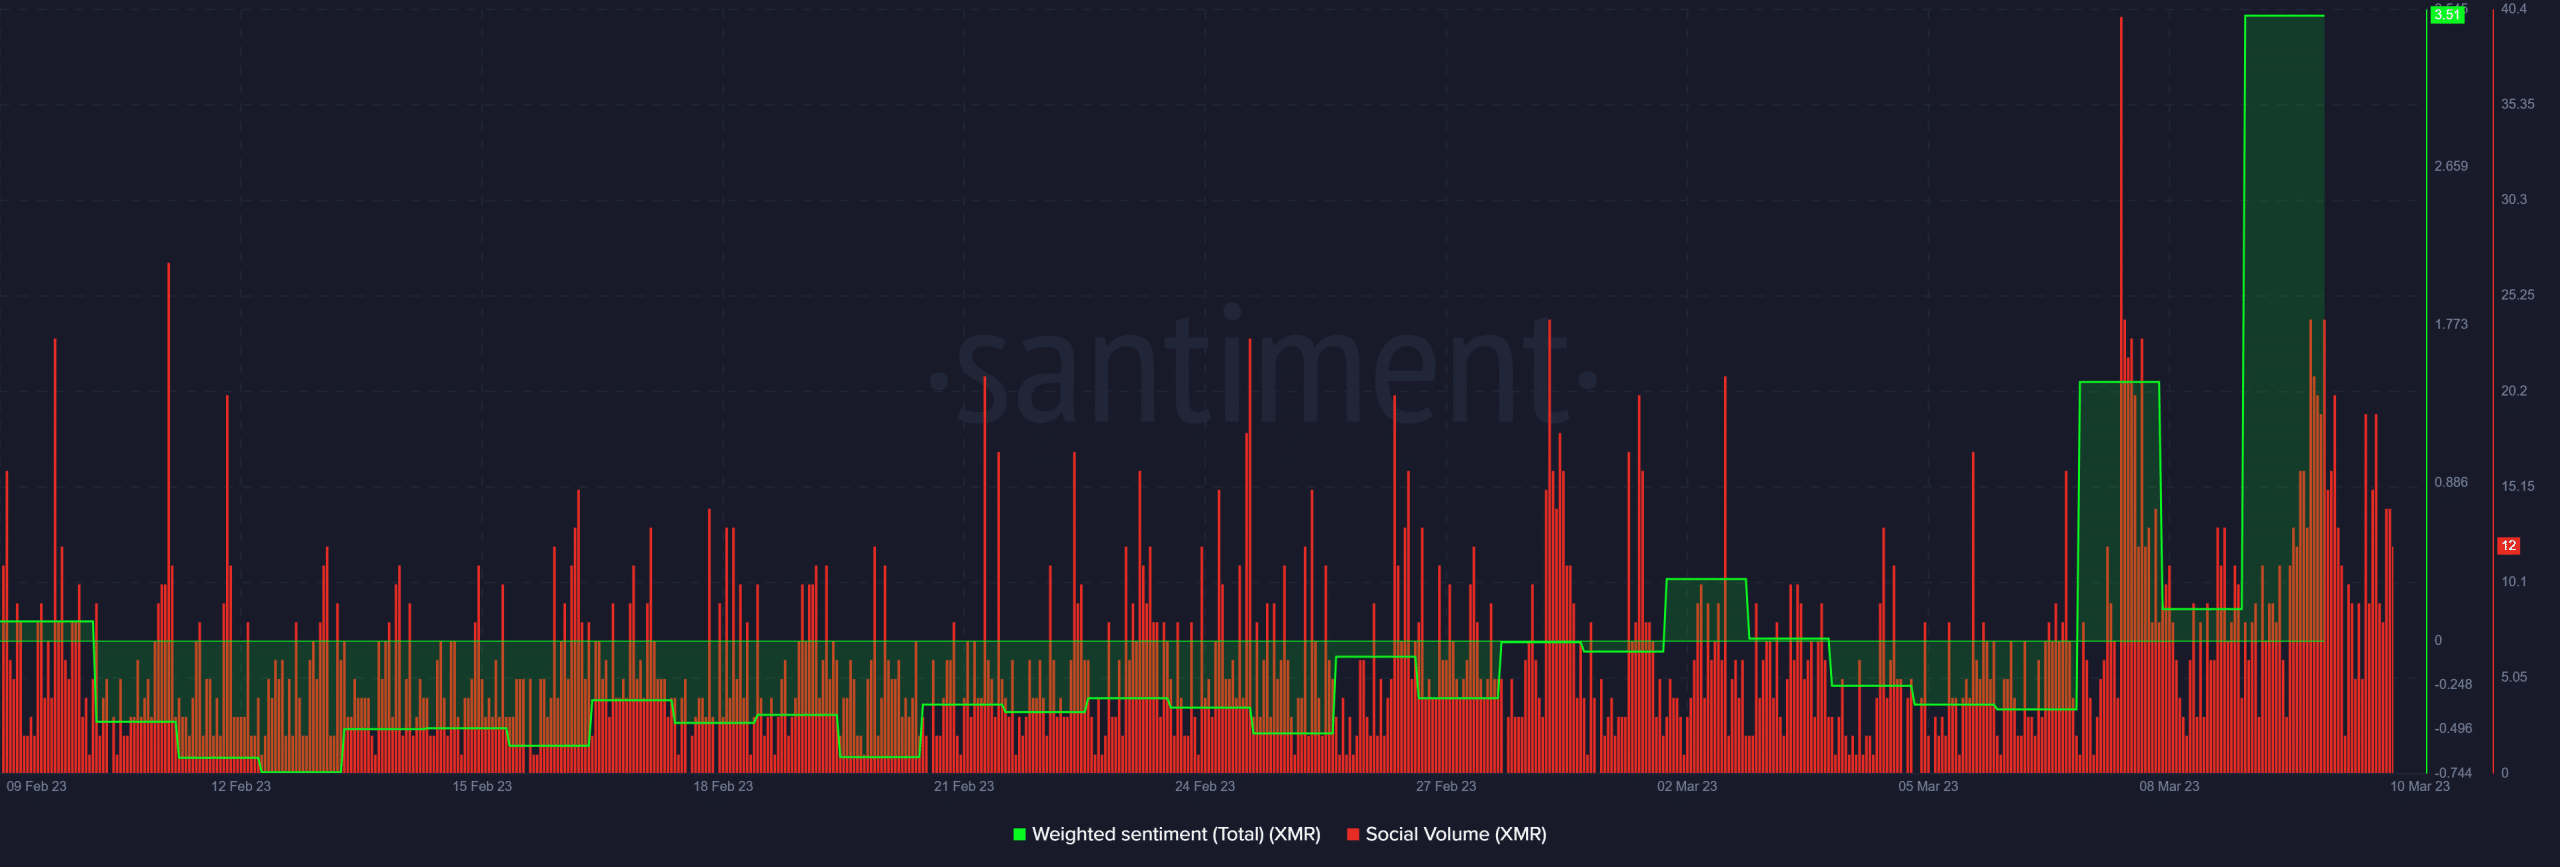 Monero weighted sentiment and social volume